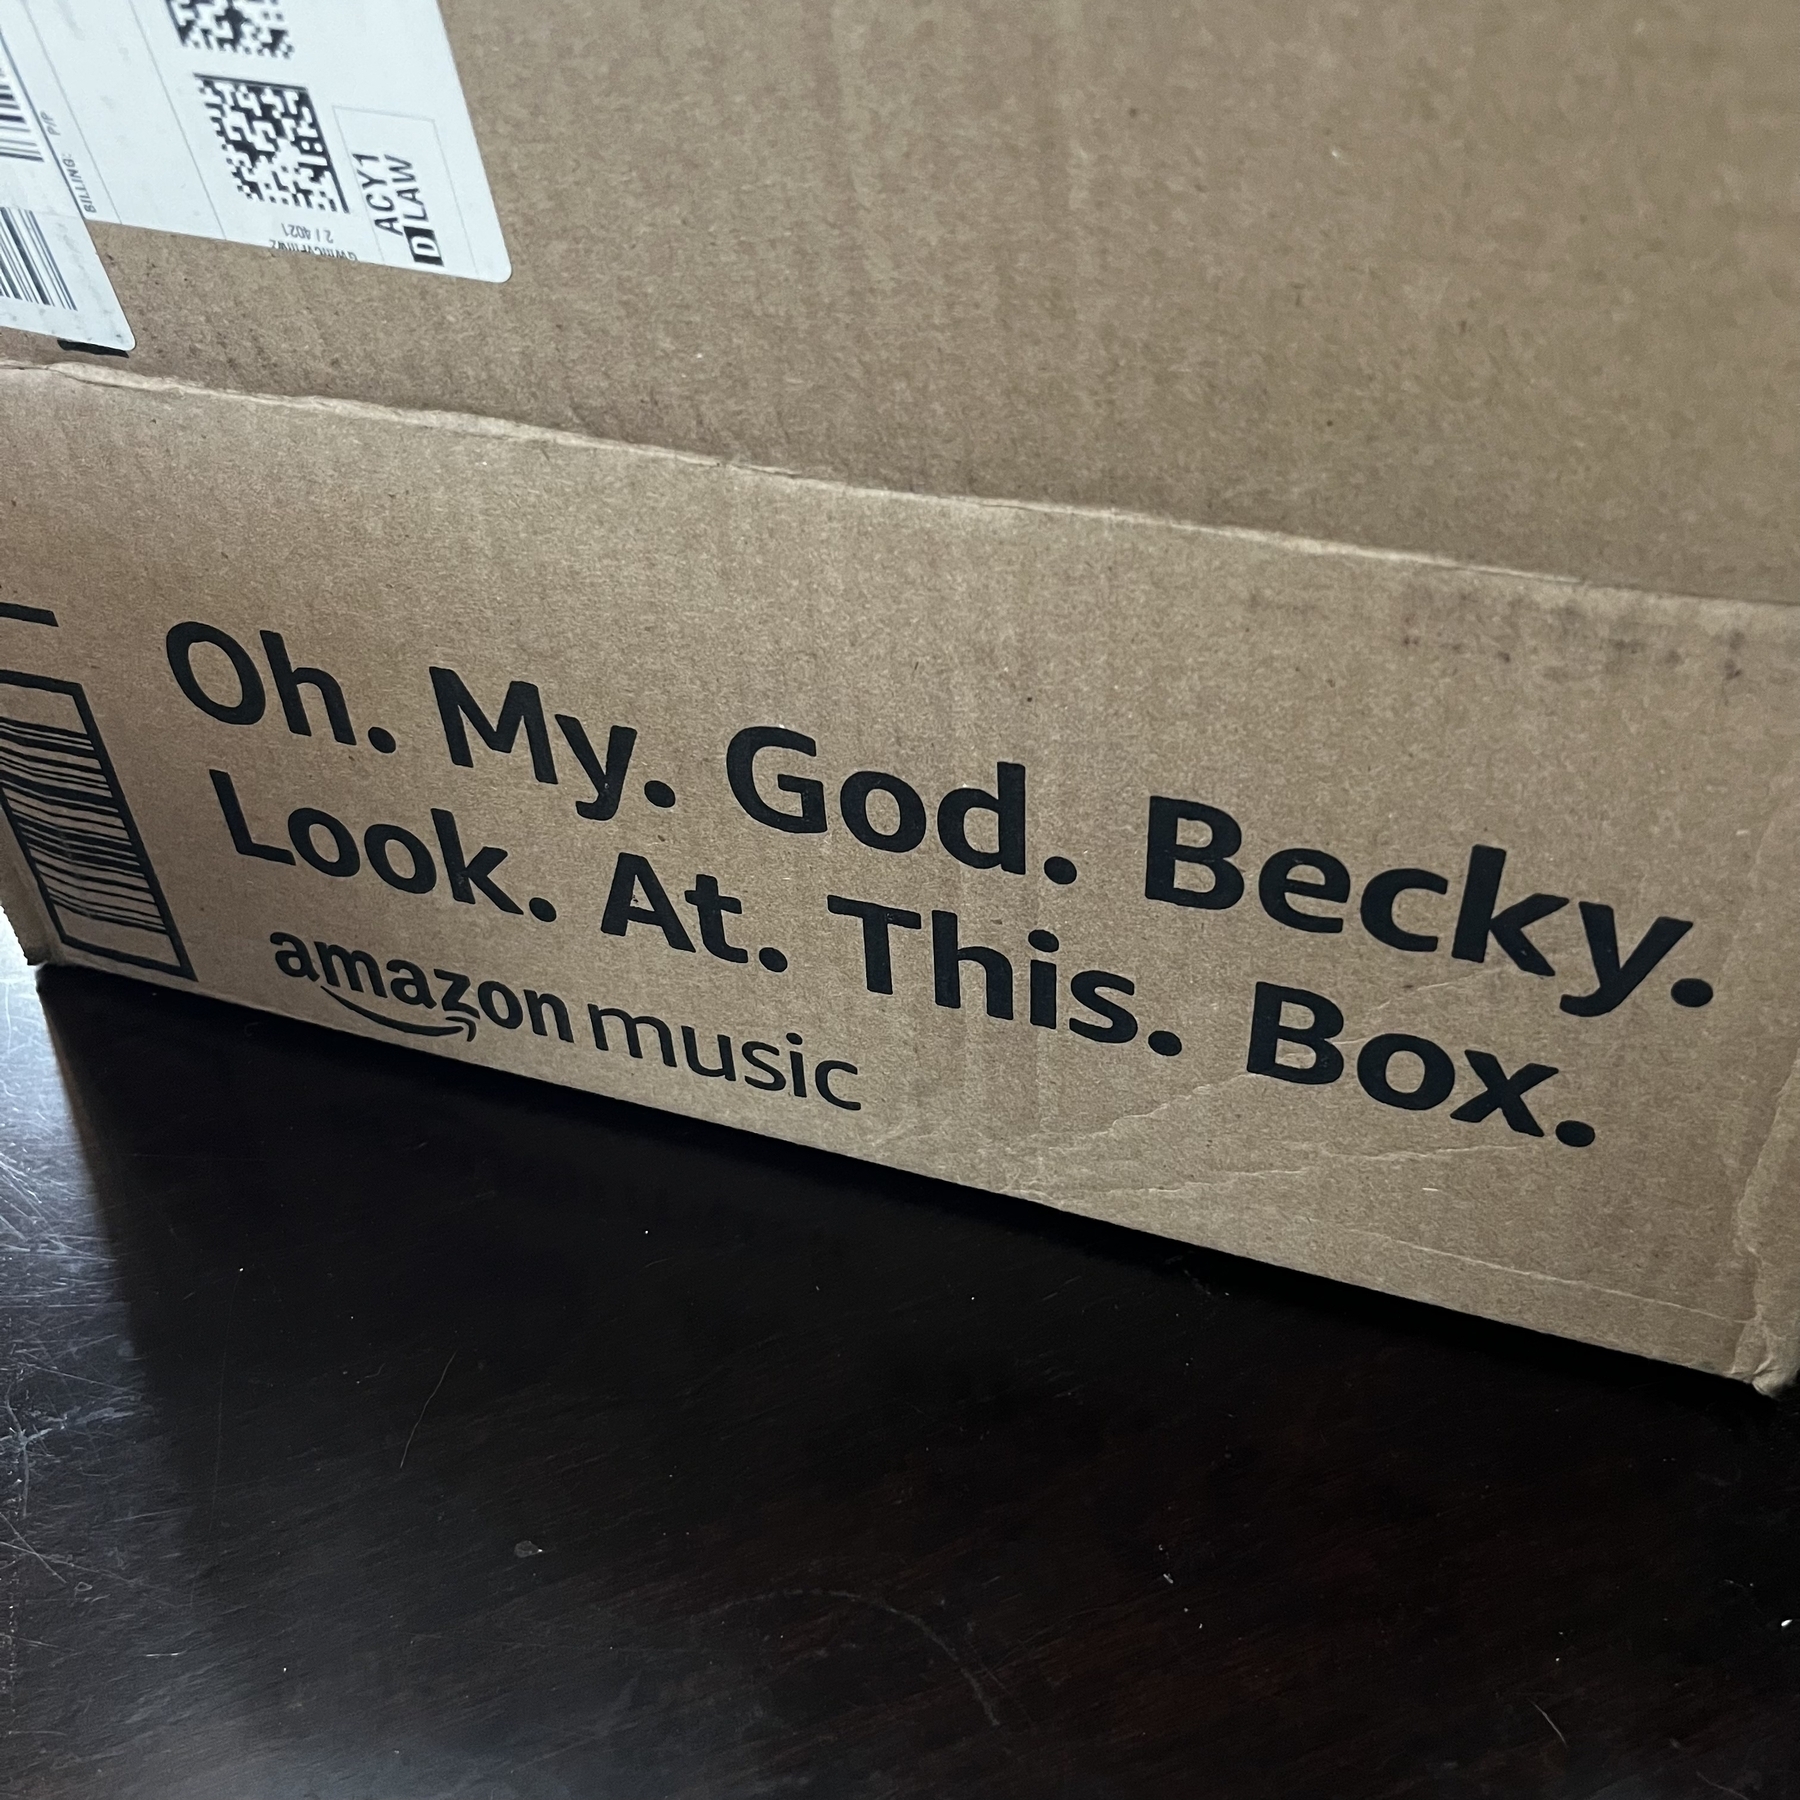 A cardboard box inscribed with “Oh. My. God. Becky. Look. At. This. Box.”